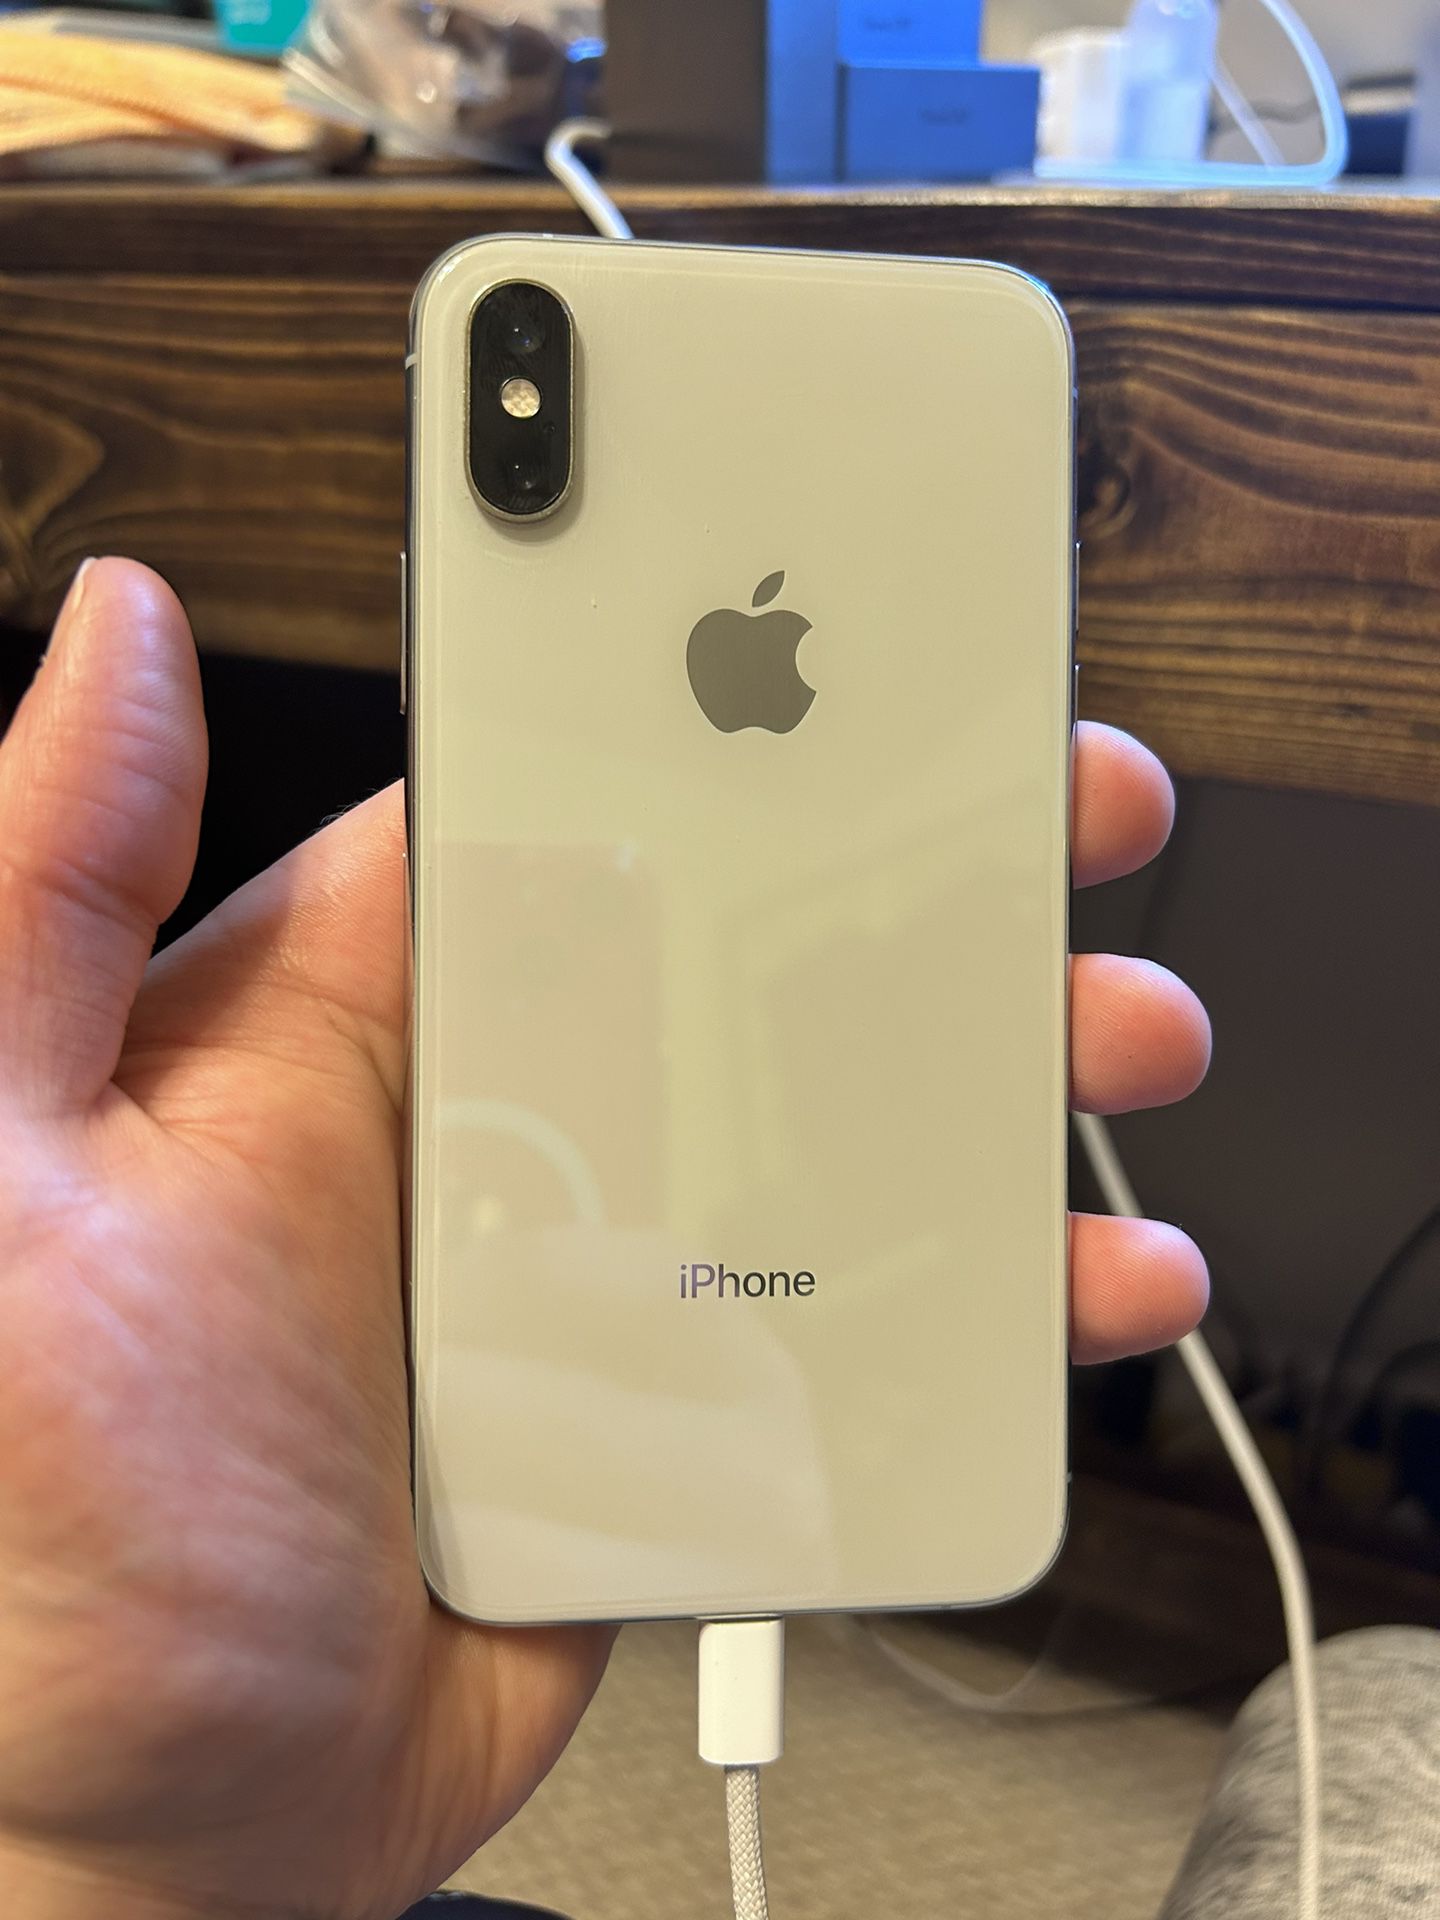 iPhone XS Silver 256GB Unlocked (Simpsonville) for Sale in Simpsonville, SC  OfferUp